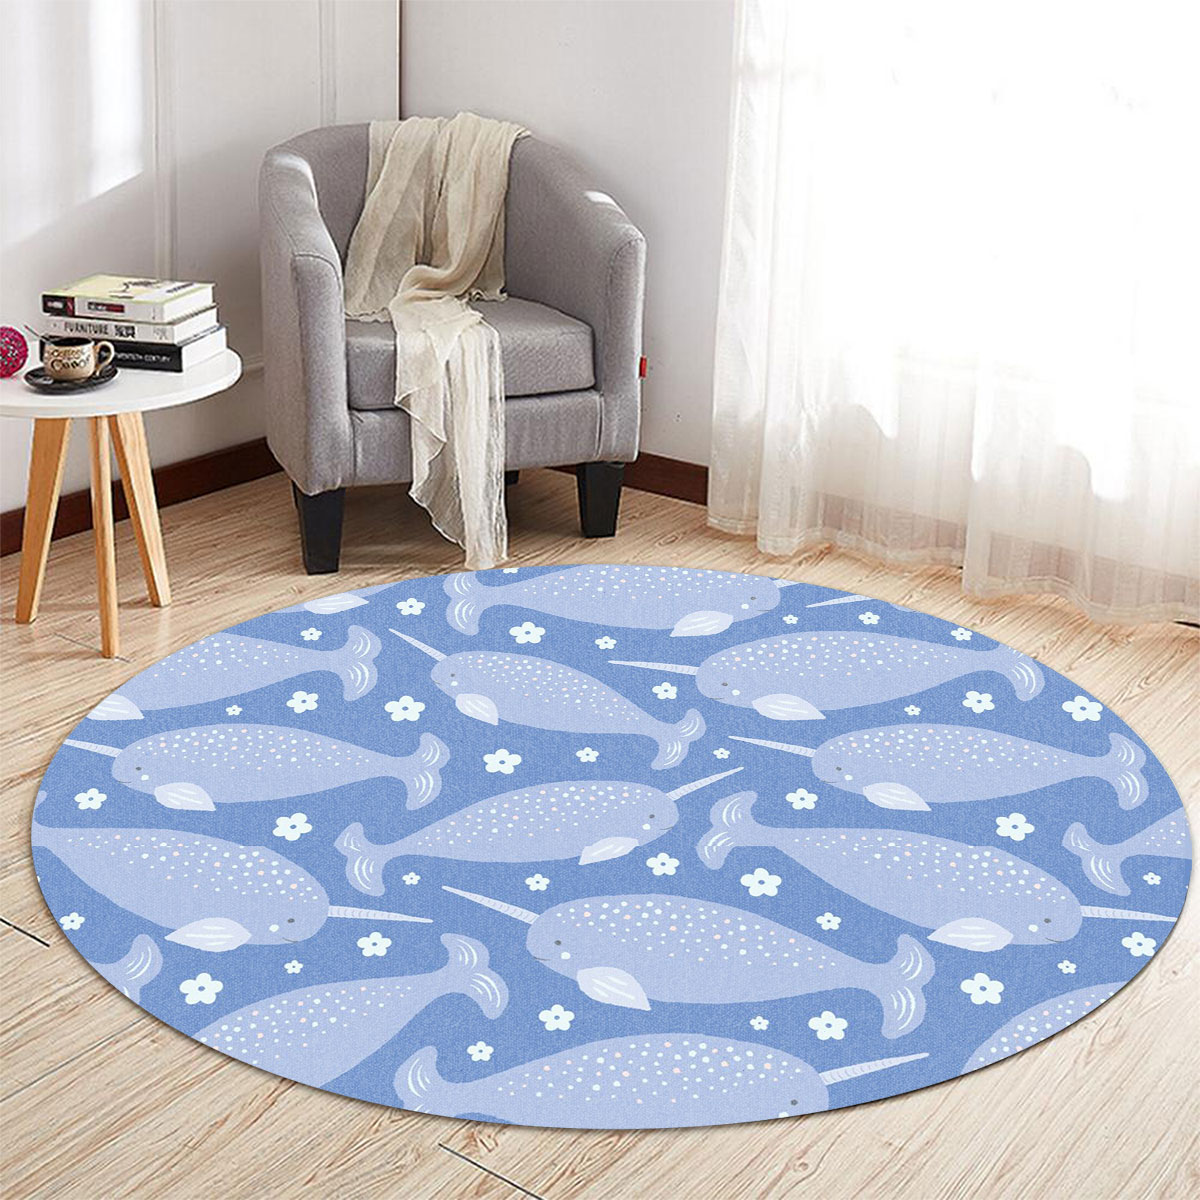 Floral Narwhal Round Carpet